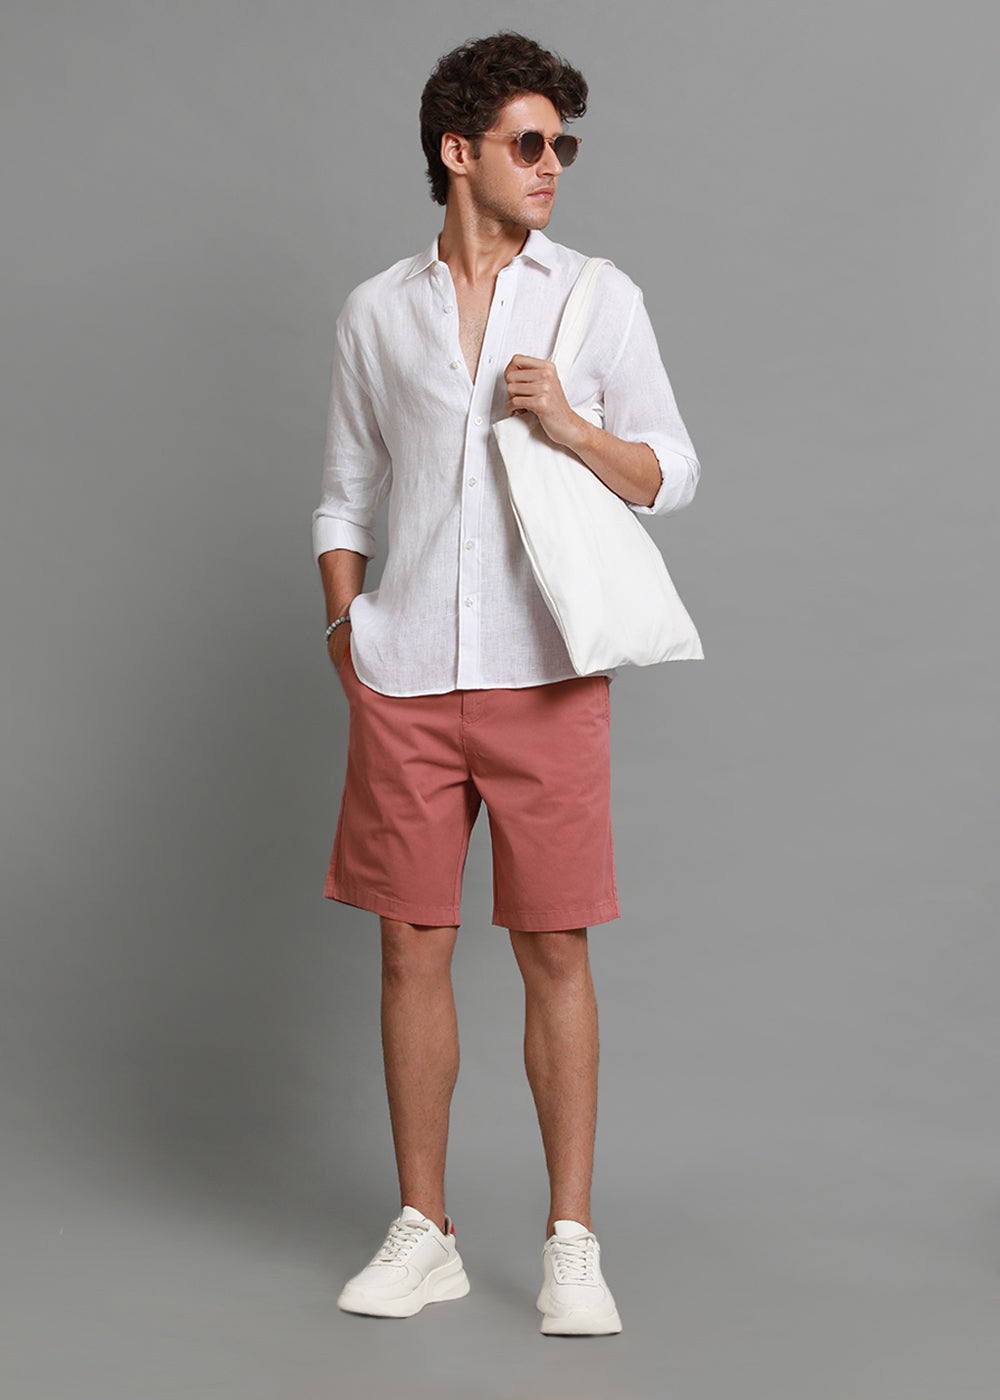 Pastel Red Cotton Shorts